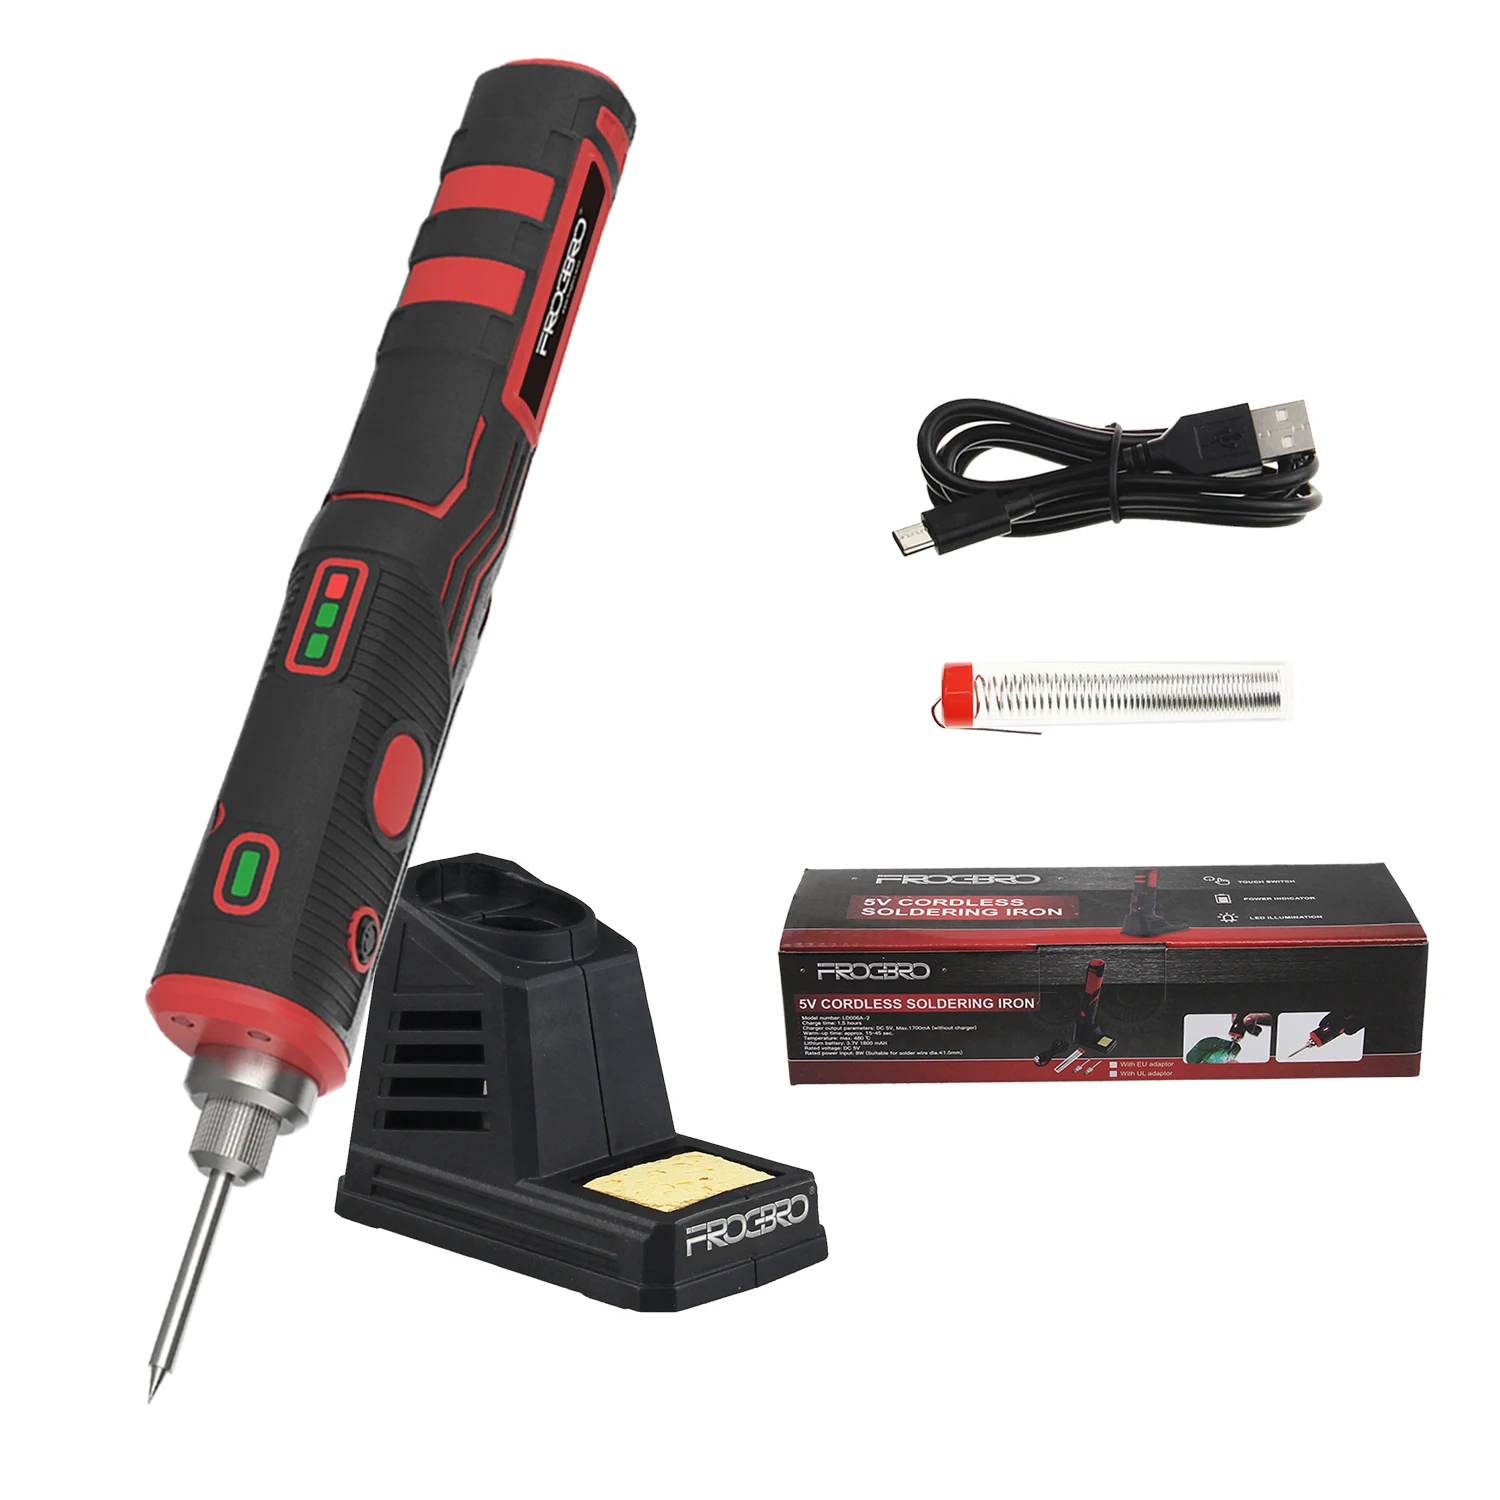 FrogBro Cordless Soldering Iron Kit Upgraded 11W Rechargeable Soldering Pen Professional Portable Wirless Repair Welding Tool